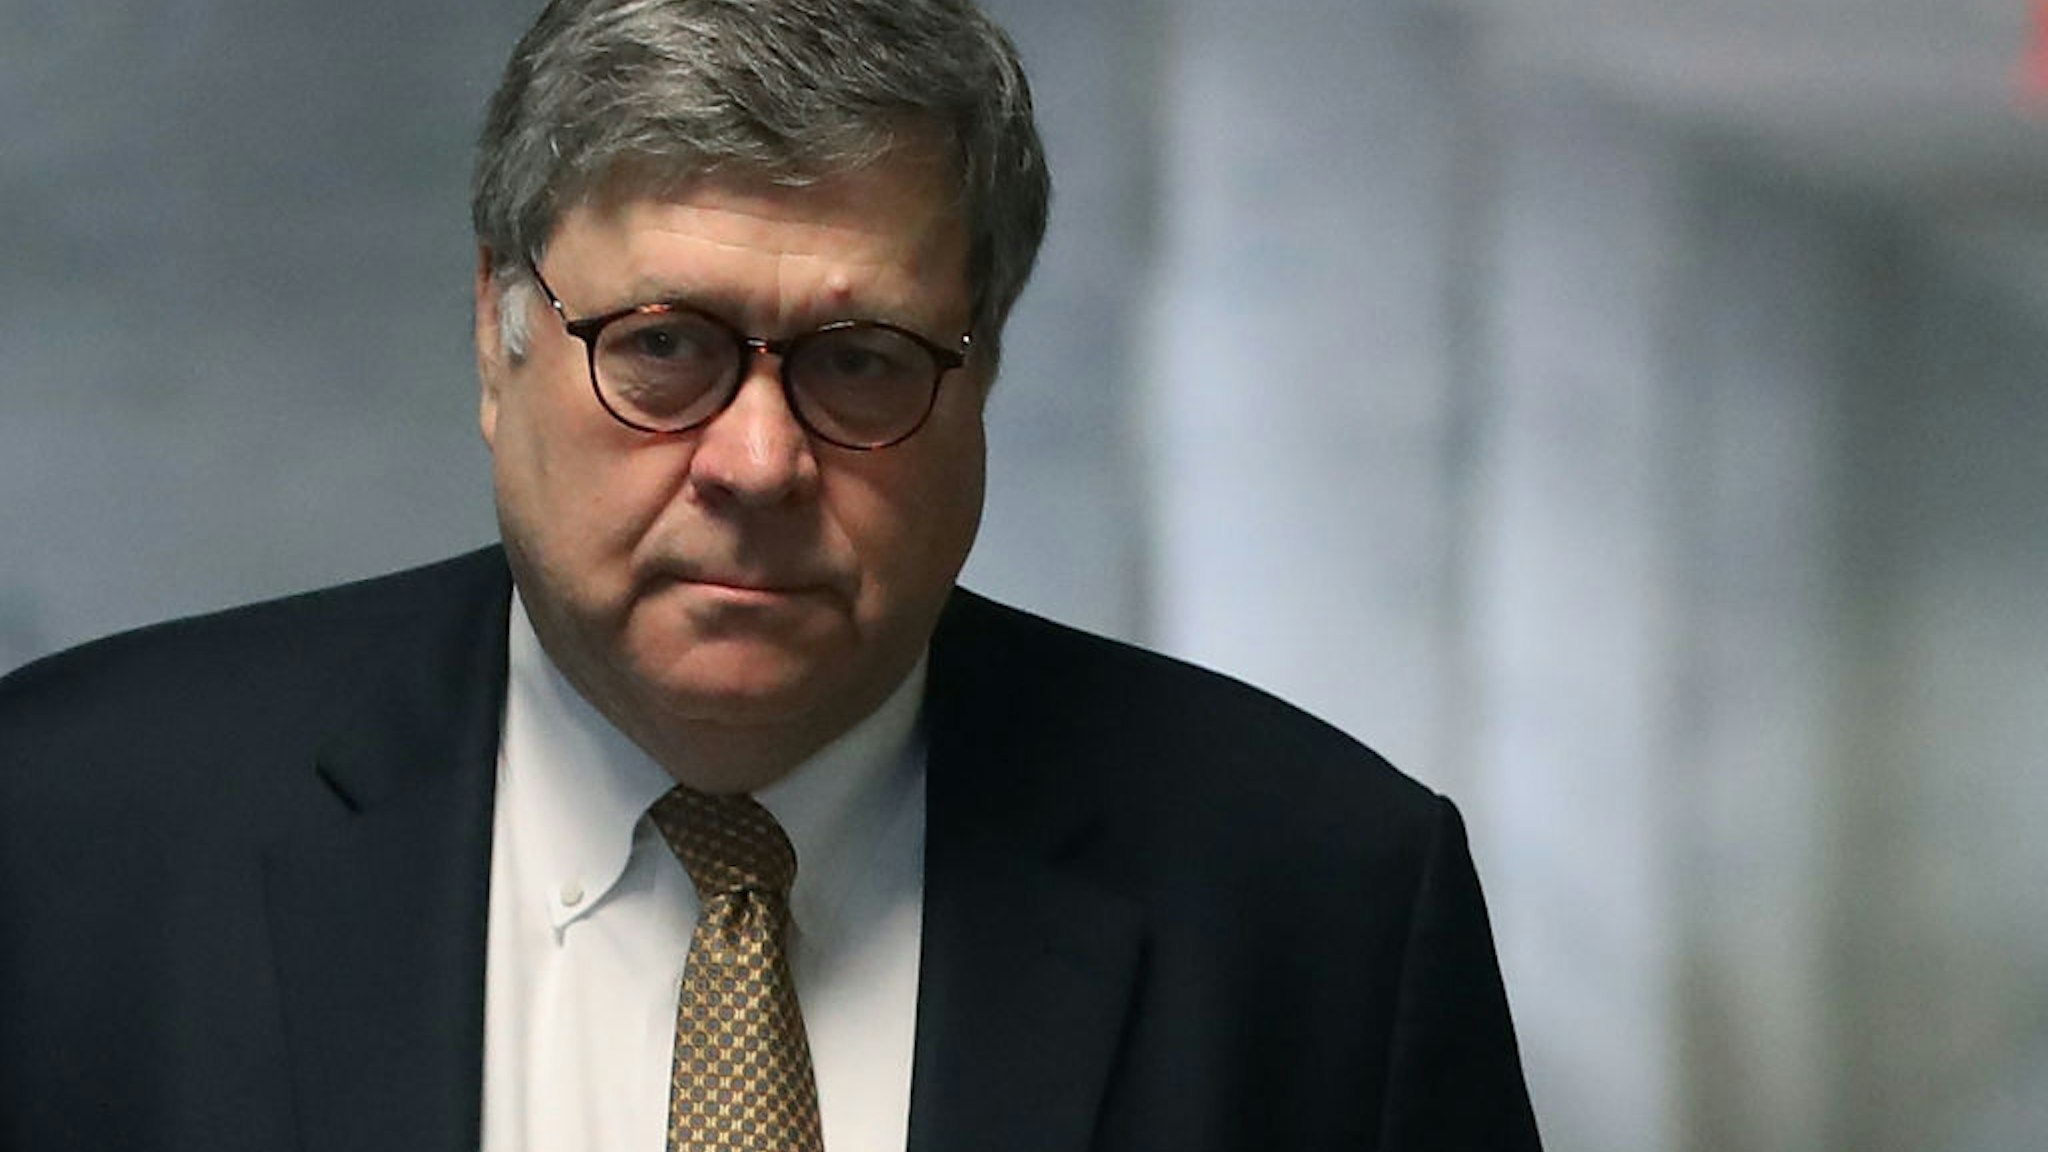 WASHINGTON, DC - JANUARY 29: Attorney General nominee William Barr arrives on Capitol Hill for a meeting with Sen. Bill Cassidy (R-LA), on January 29, 2019 in Washington, DC. Today Mr. Barr has several closed meetings scheduled with Senators. (Photo by Mark Wilson/Getty Images)WASHINGTON, DC - JANUARY 29: Attorney General nominee William Barr arrives on Capitol Hill for a meeting with Sen. Bill Cassidy (R-LA), on January 29, 2019 in Washington, DC. Today Mr. Barr has several closed meetings scheduled with Senators. (Photo by Mark Wilson/Getty Images)